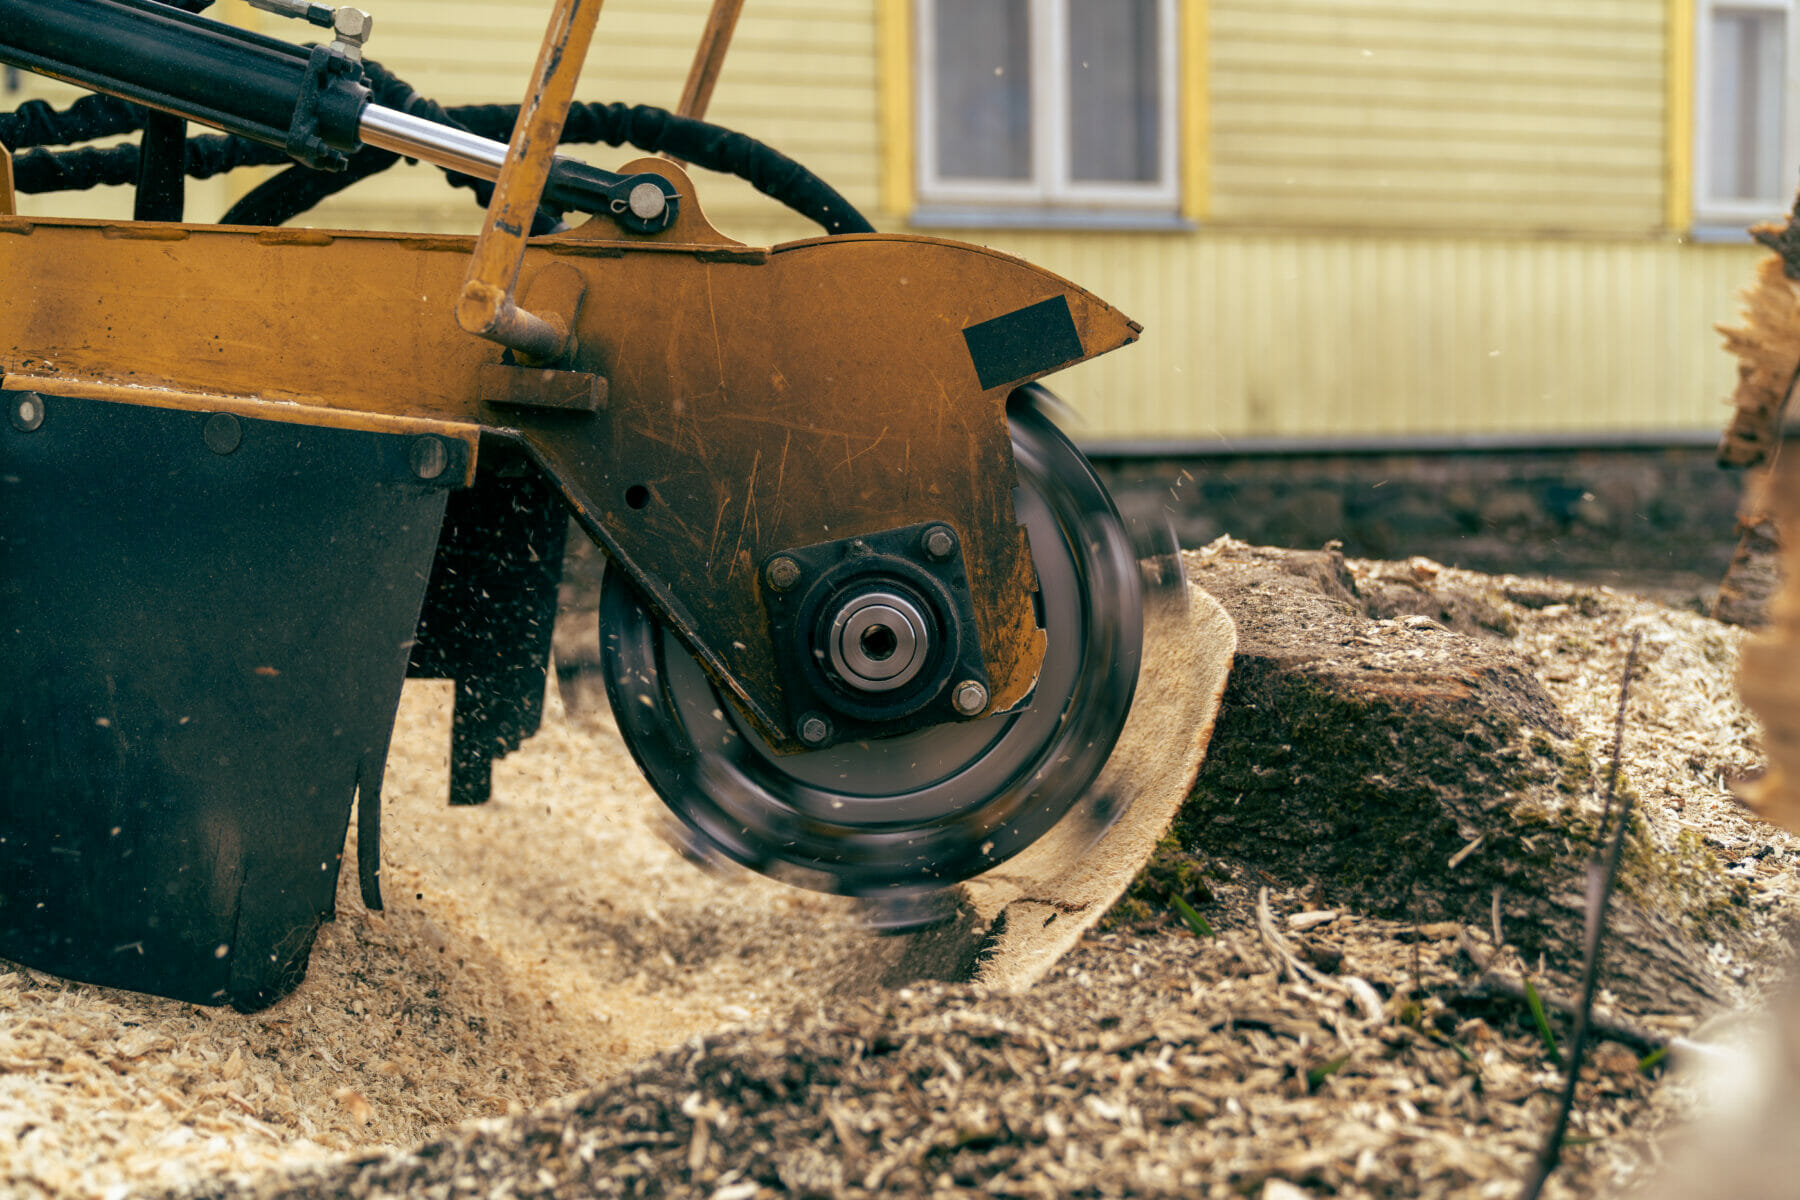 Removal of a tree stump using a stump grinder